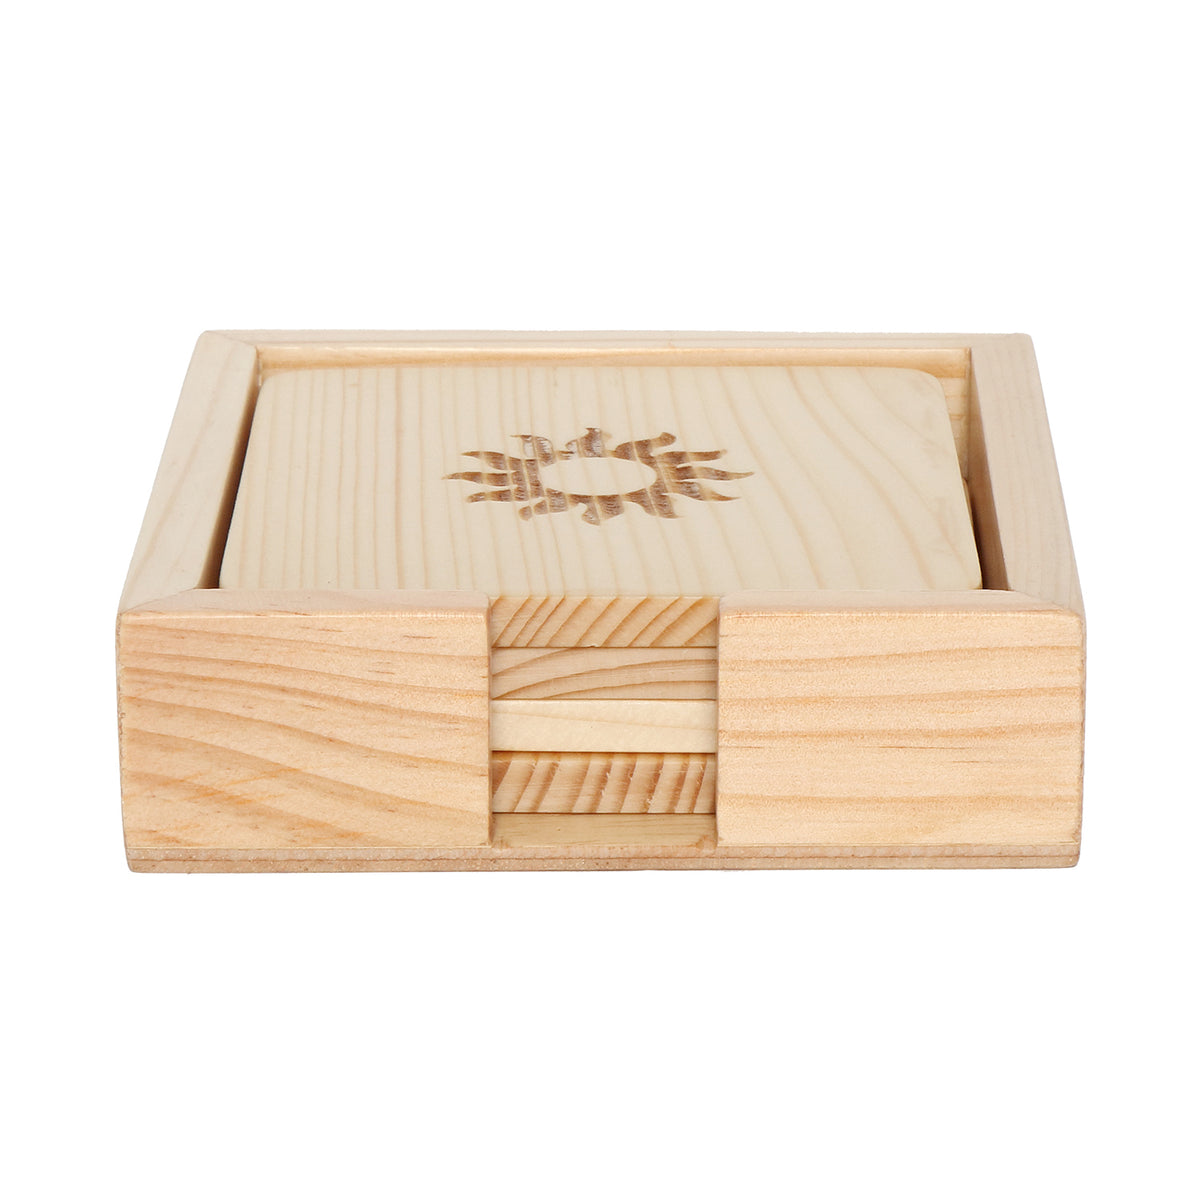 Wood Coaster Sun Motif Carving Set Of 4 With Stand | Tea & Table Coaster